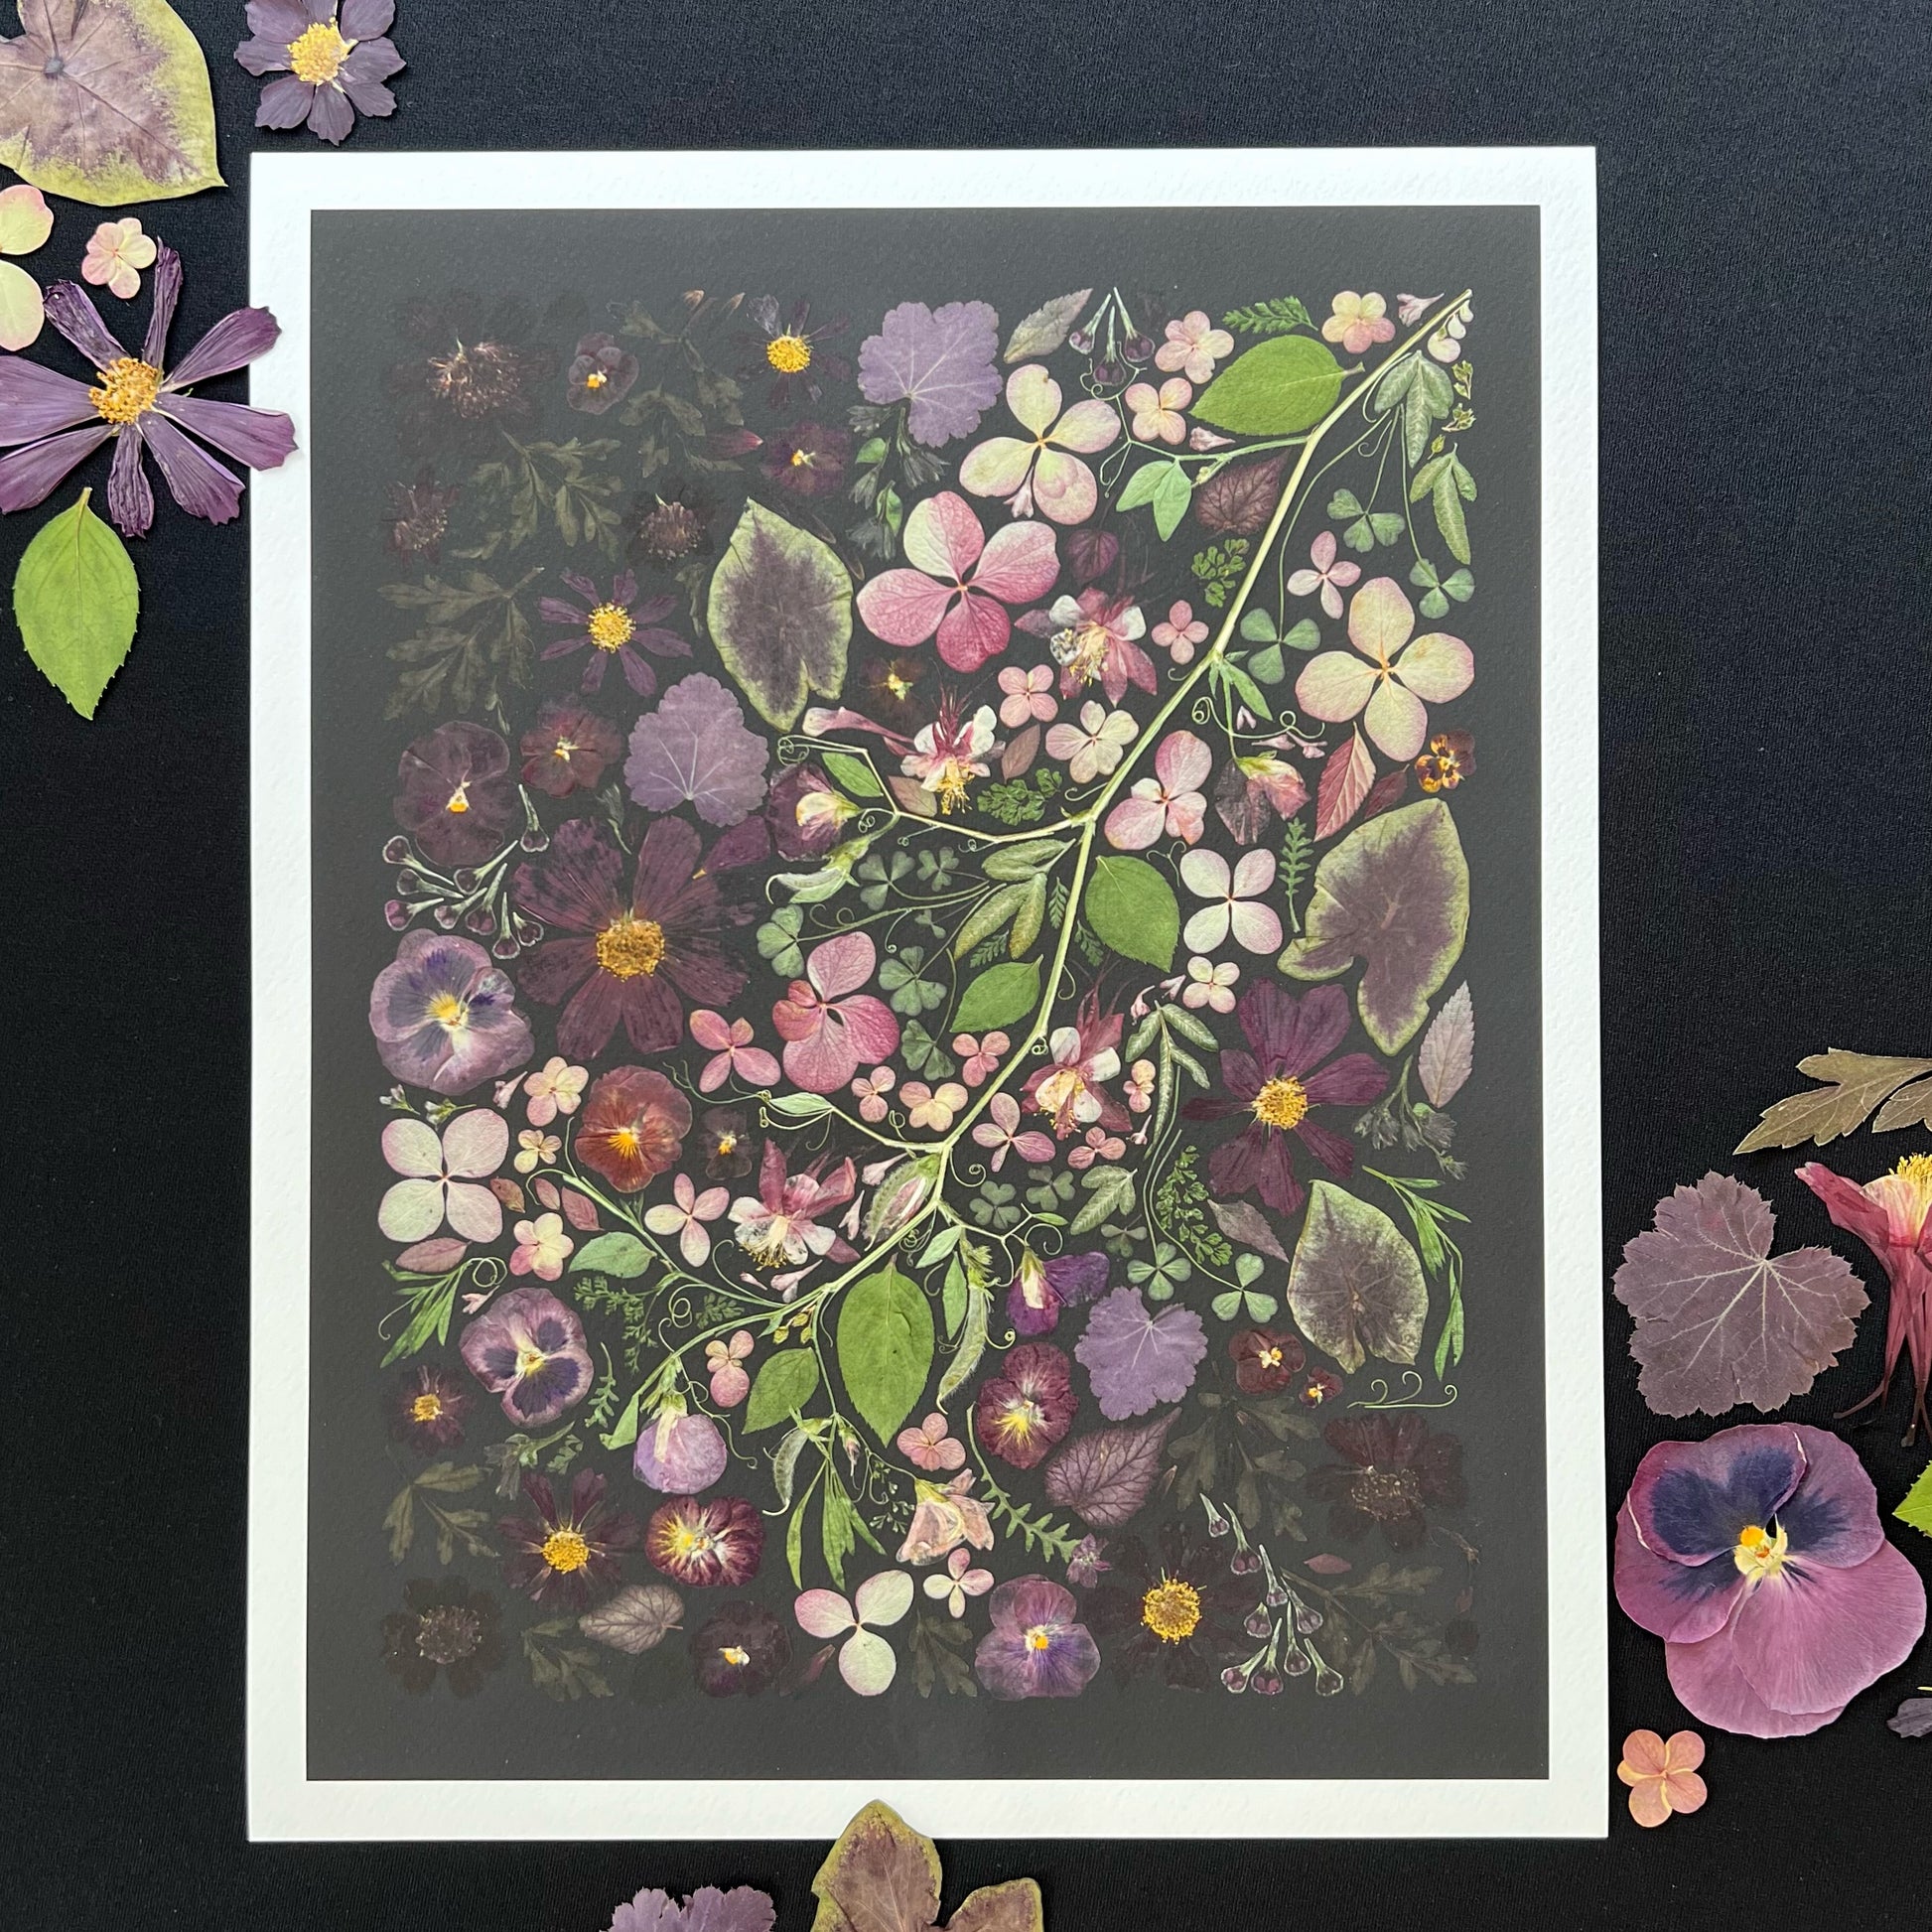 A black picture with a white trim is sitting on top of black fabric. The art has pressed flowers in a variety of colors appearing to come from a vine. There are several loose pressed flowers laying on the fabric and a few are touching the white border. 